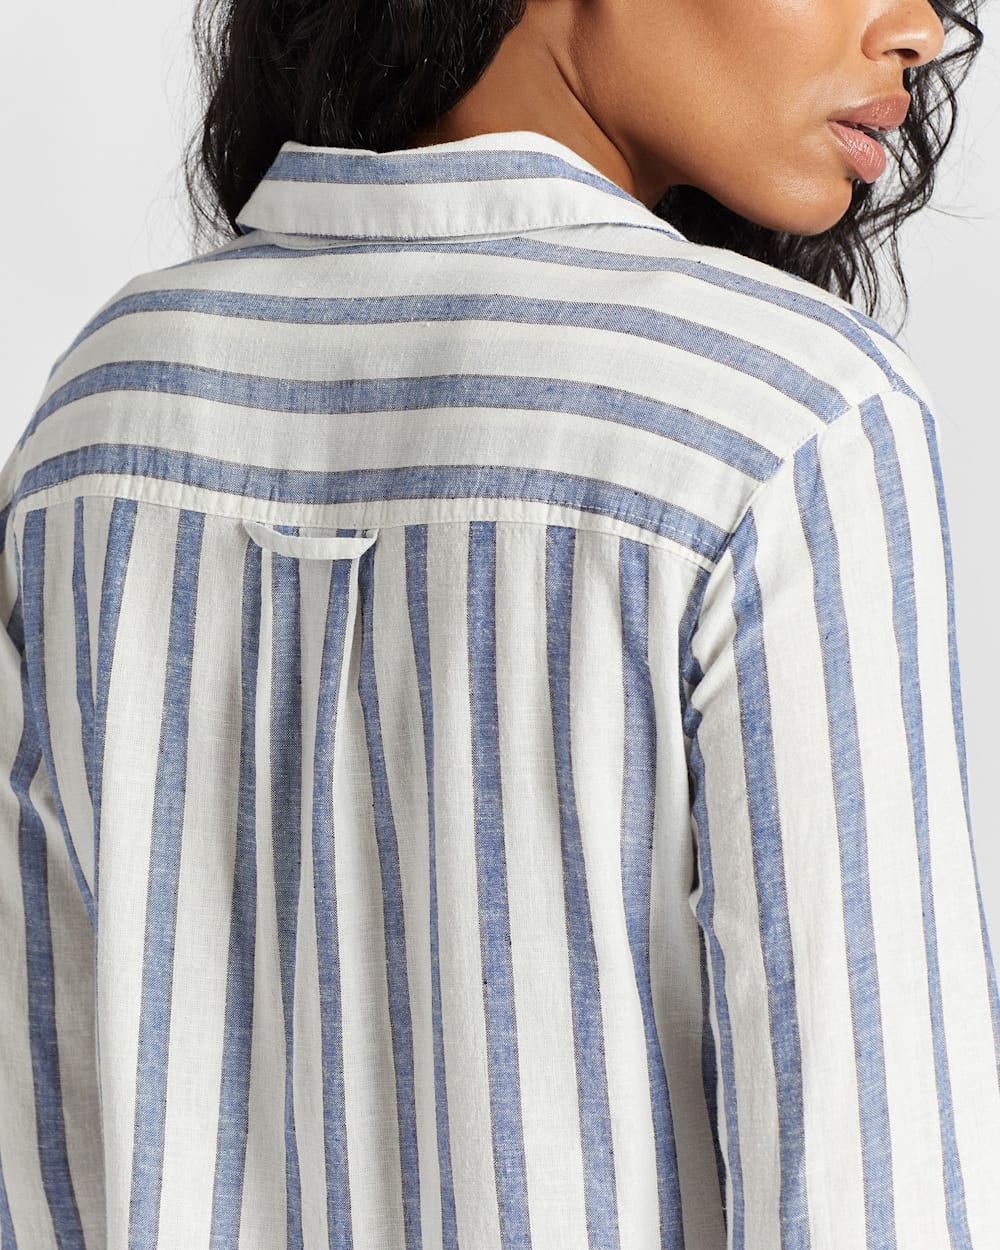 ALTERNATE VIEW OF WOMEN'S LONG-SLEEVE TWO POCKET SHIRT IN BLUE STRIPE image number 5